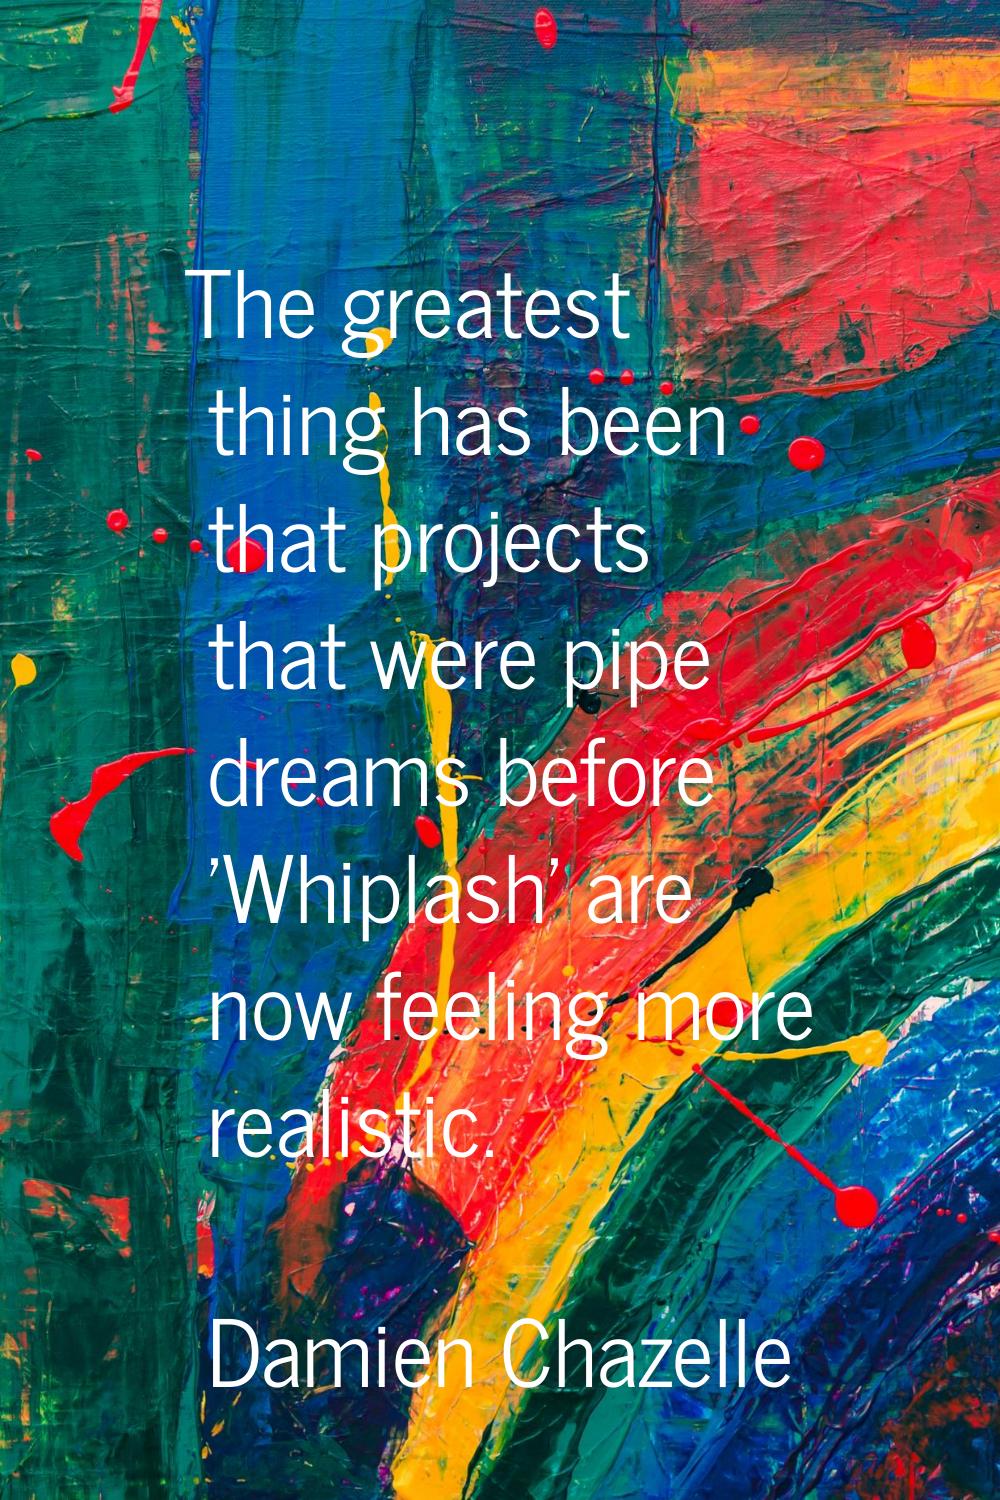 The greatest thing has been that projects that were pipe dreams before 'Whiplash' are now feeling m